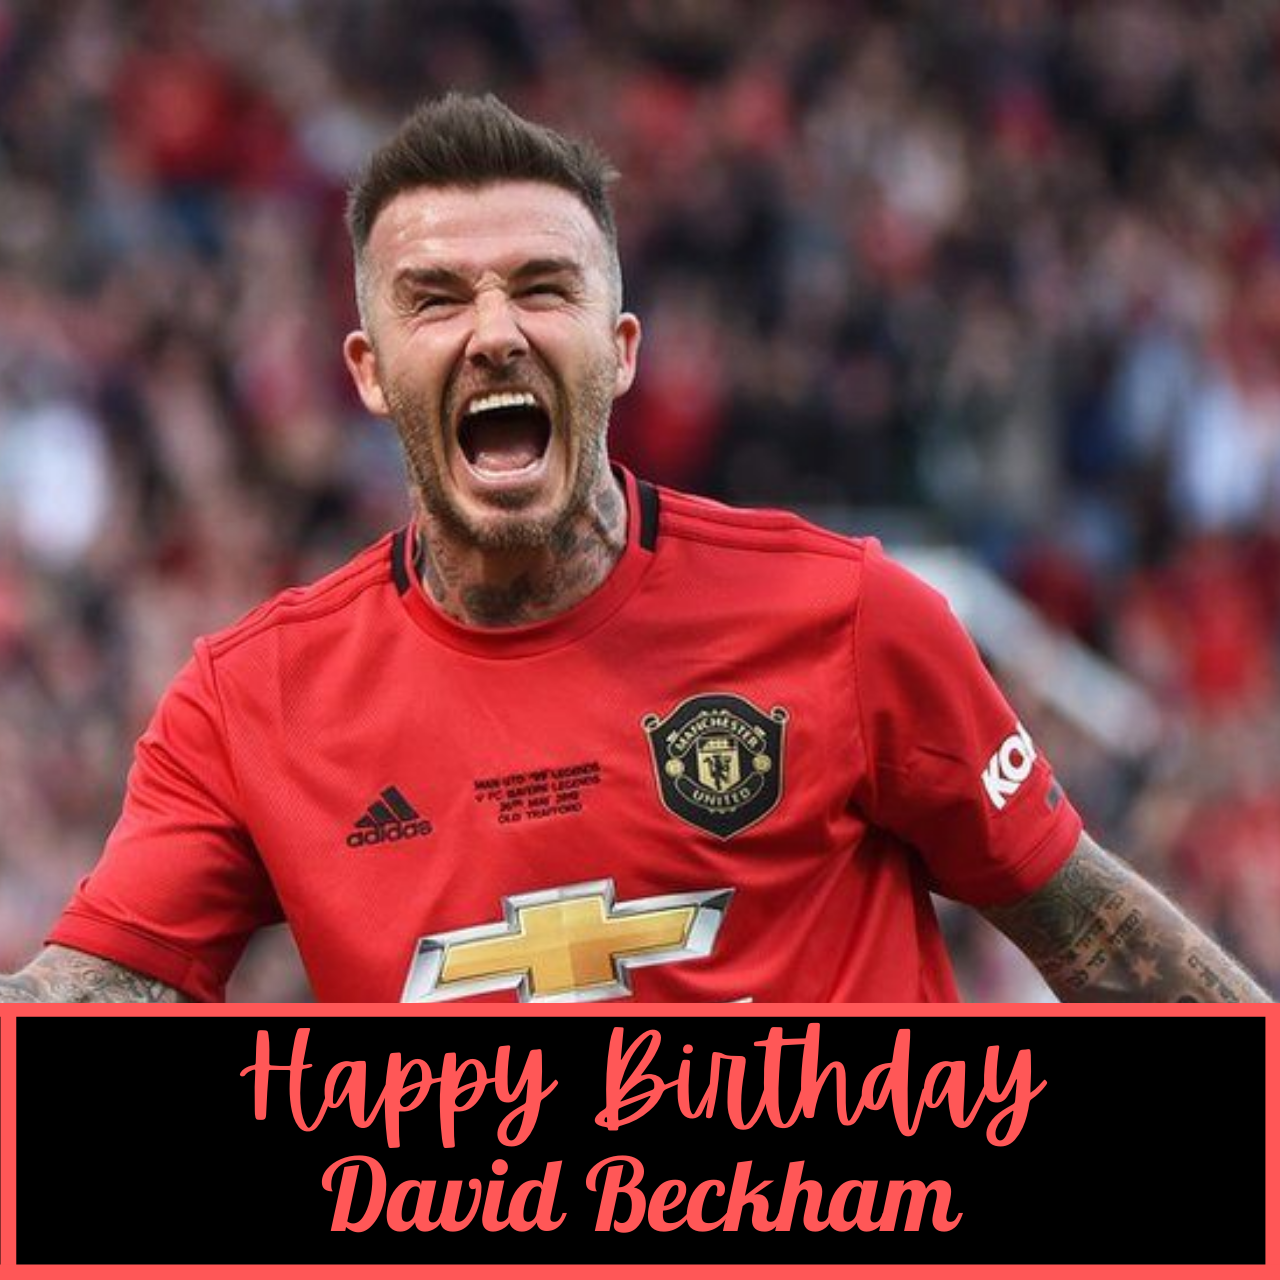 Happy Birthday David Beckham: Top Wishes, Messages, Greetings, Status, and Memes To Great Legend